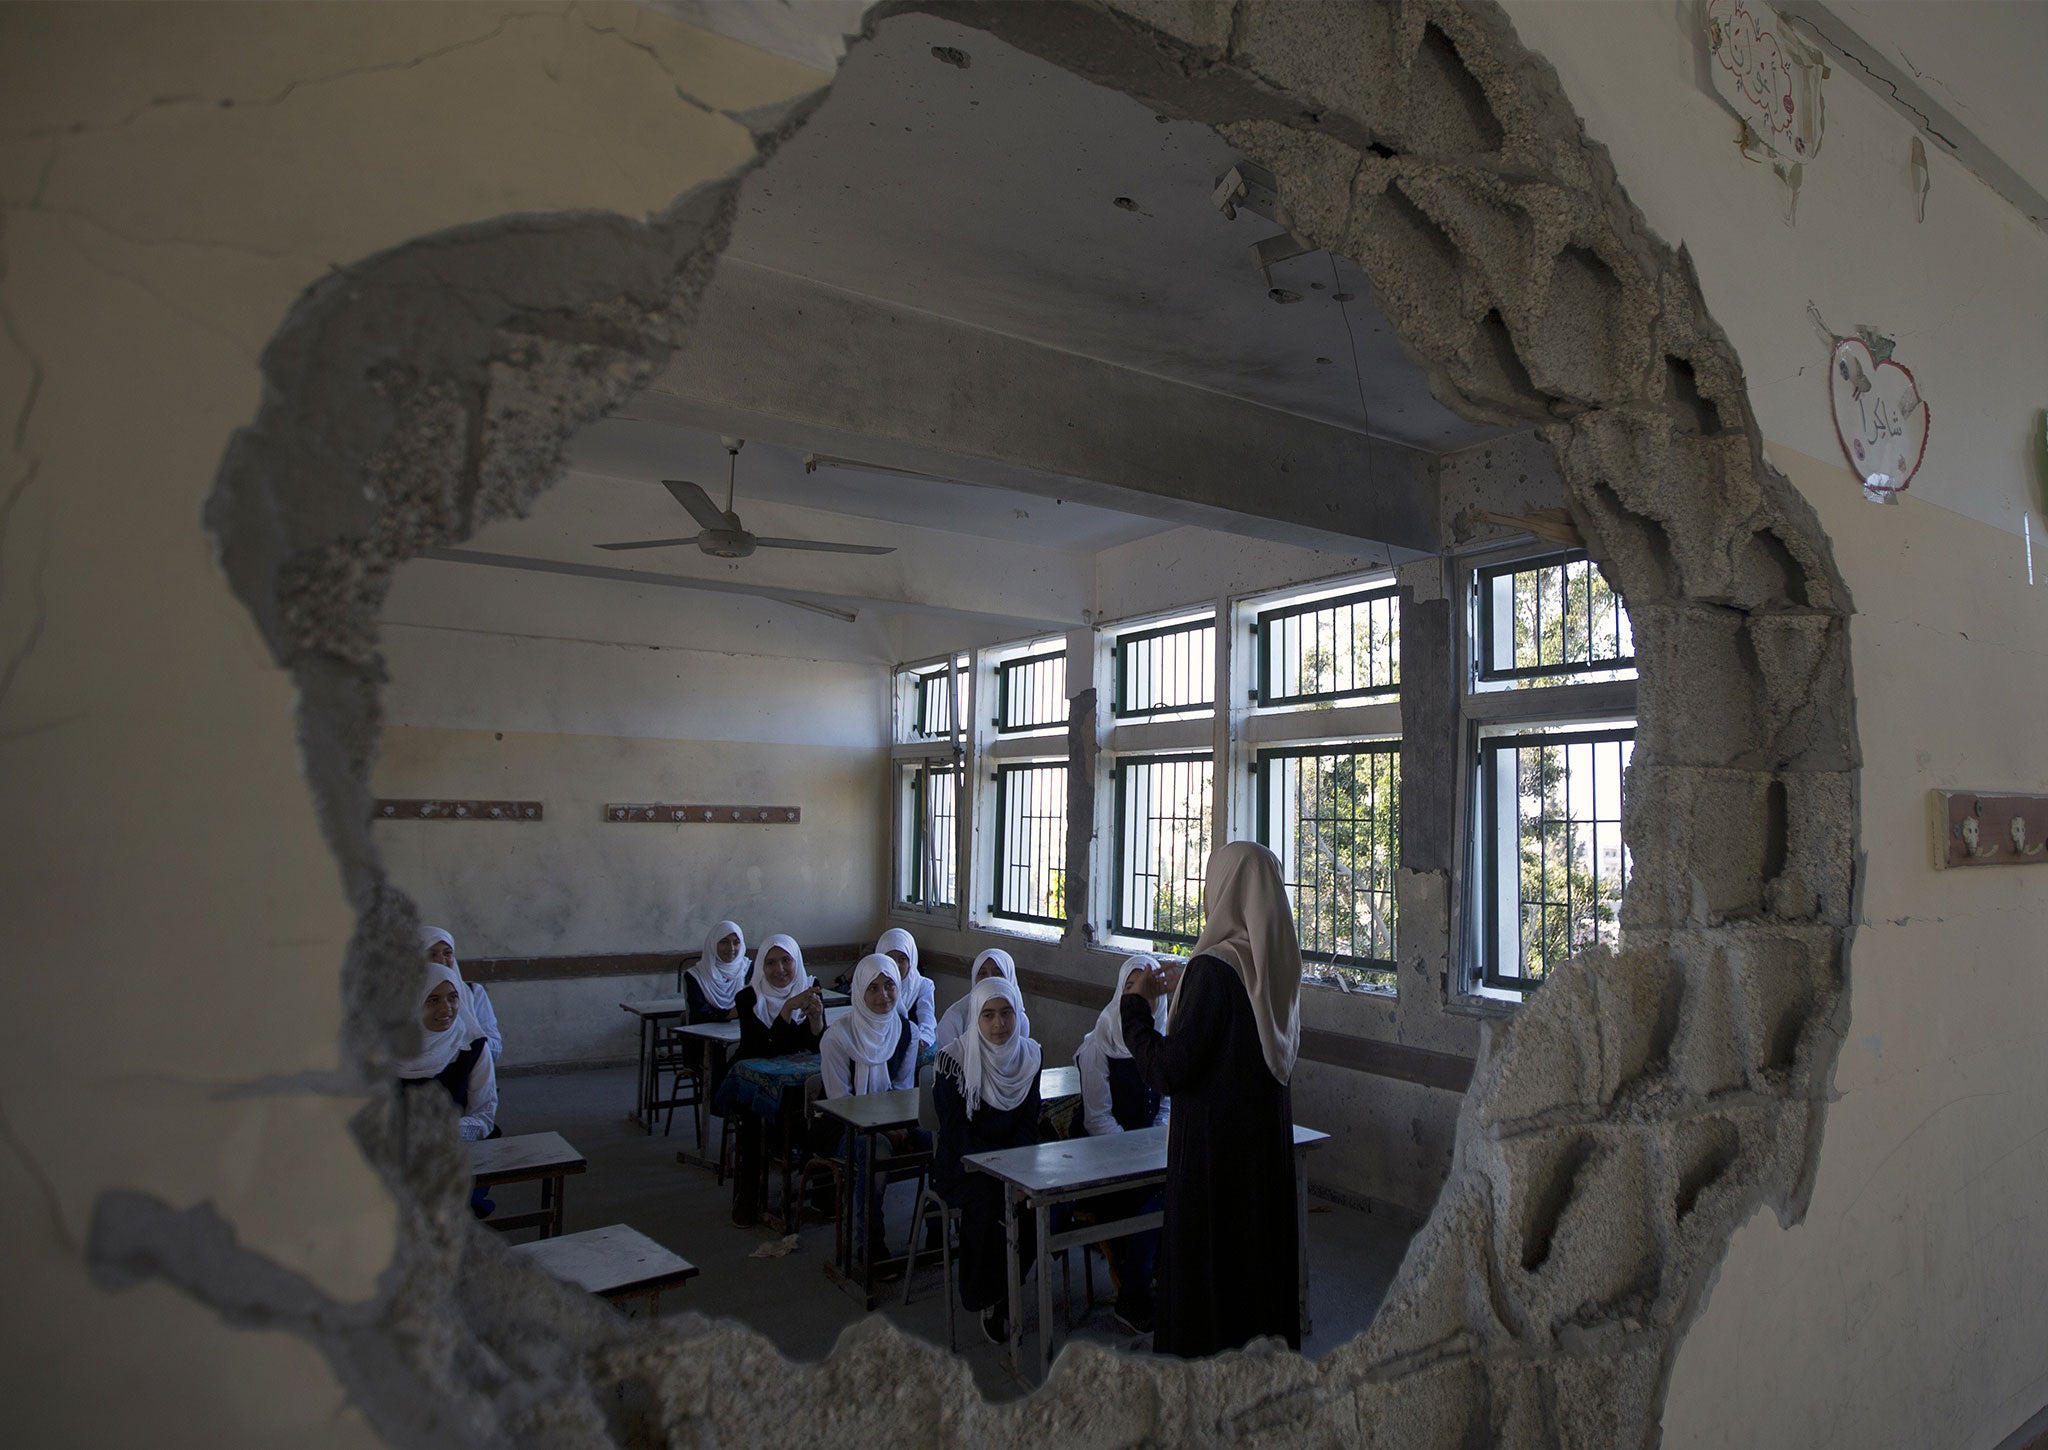 Palestinian students are seen through a damaged sitting in a classroom at a goverment school in the Shejaiya neighbourhood of Gaza City on September 14, 2014